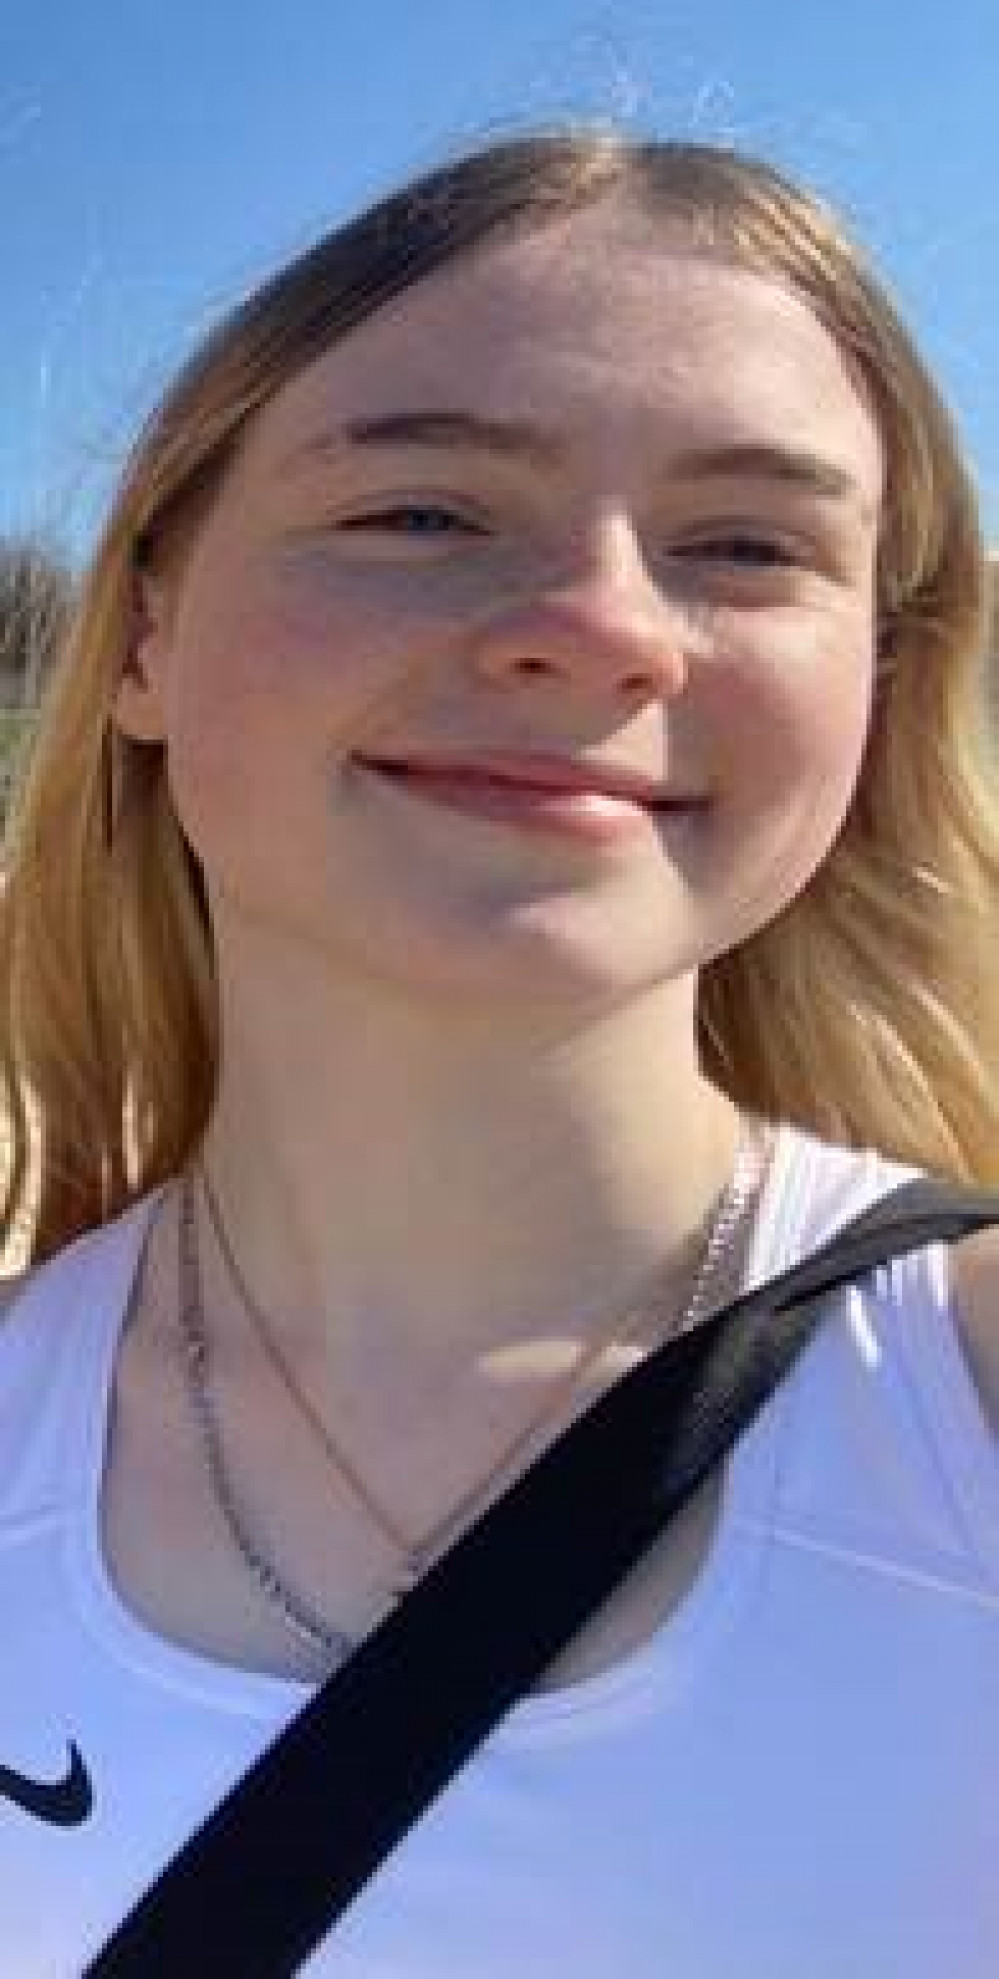 Police have issued a missing persons alert for a teen girl from Twickenham.